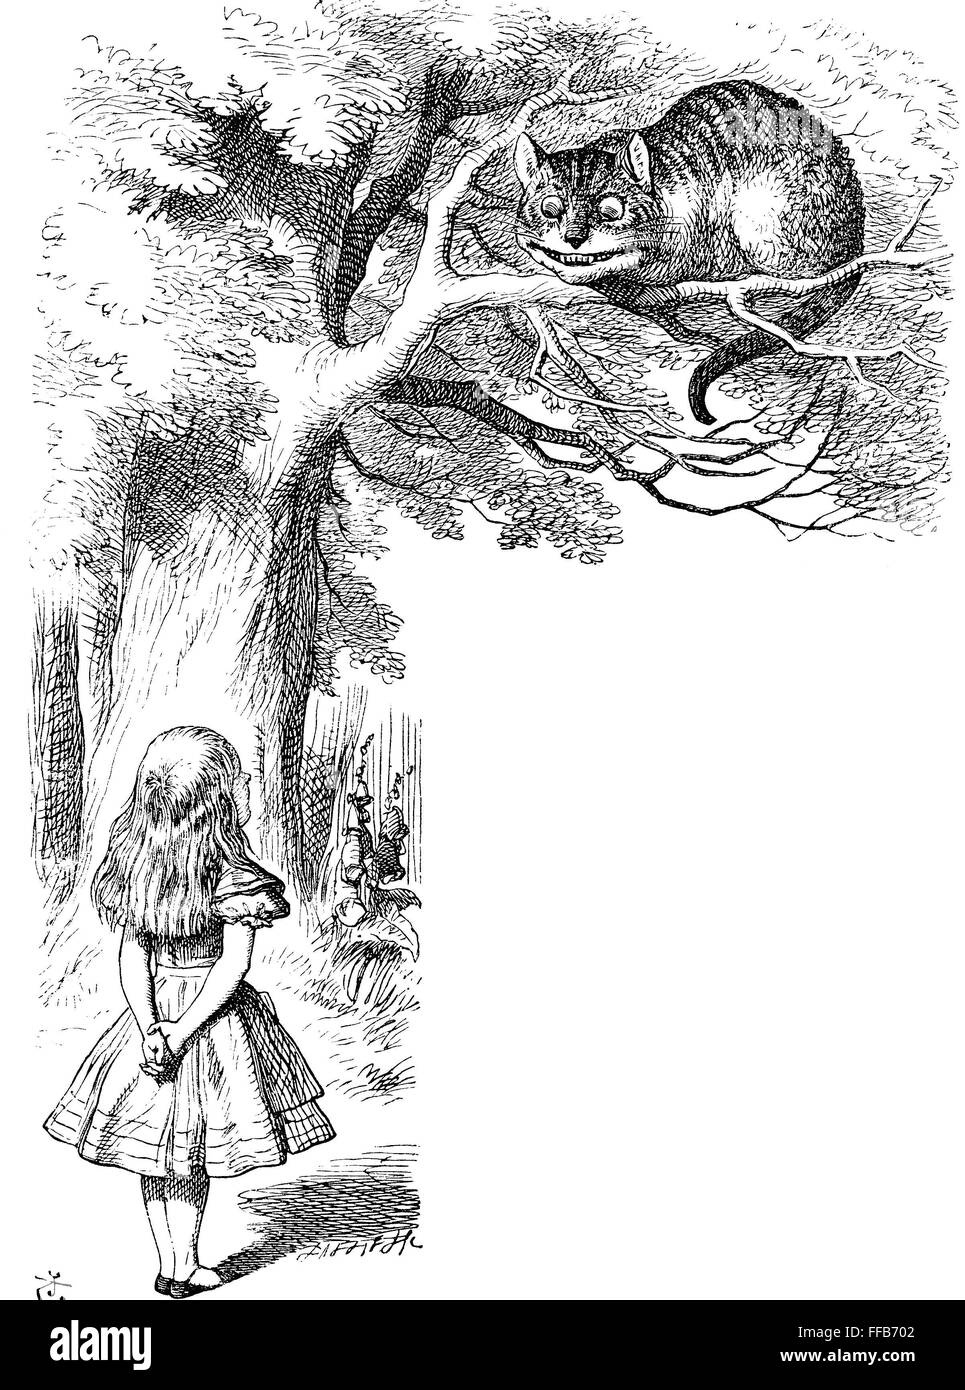 Carroll Alice 1865 Nalice And The Cheshire Cat Illustration By Sir John Tenniel From The 3769